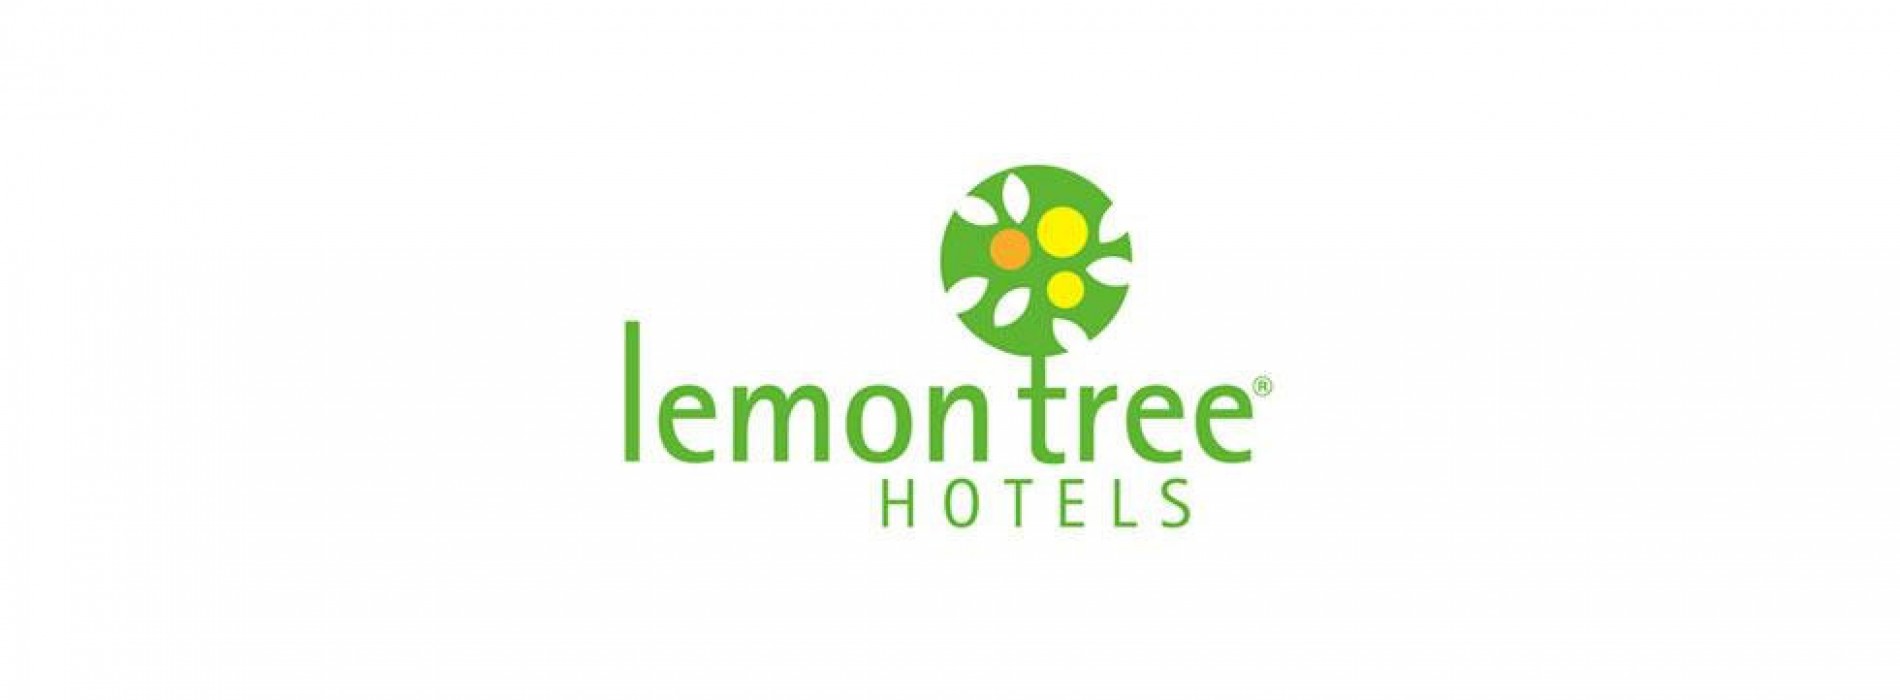 Lemon Tree Hotels ranked amongst the top 10 best companies to work for in India